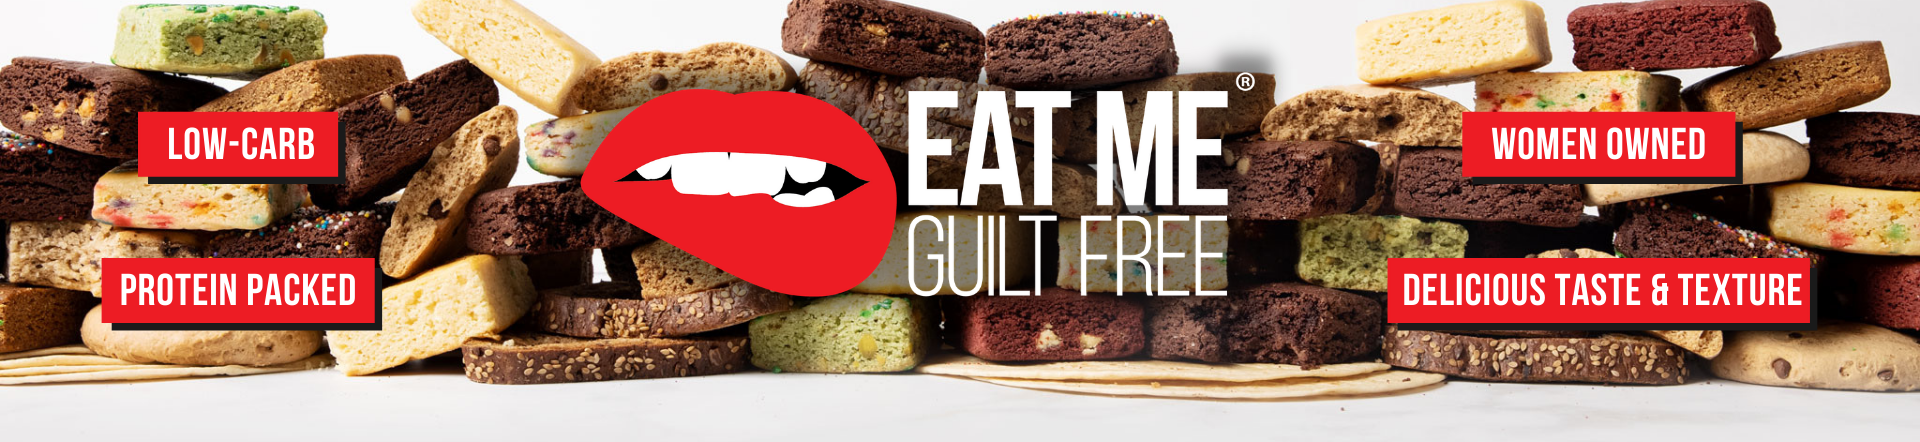 Eat Me Guilt Free High Protein Breads Tortillas Brownies